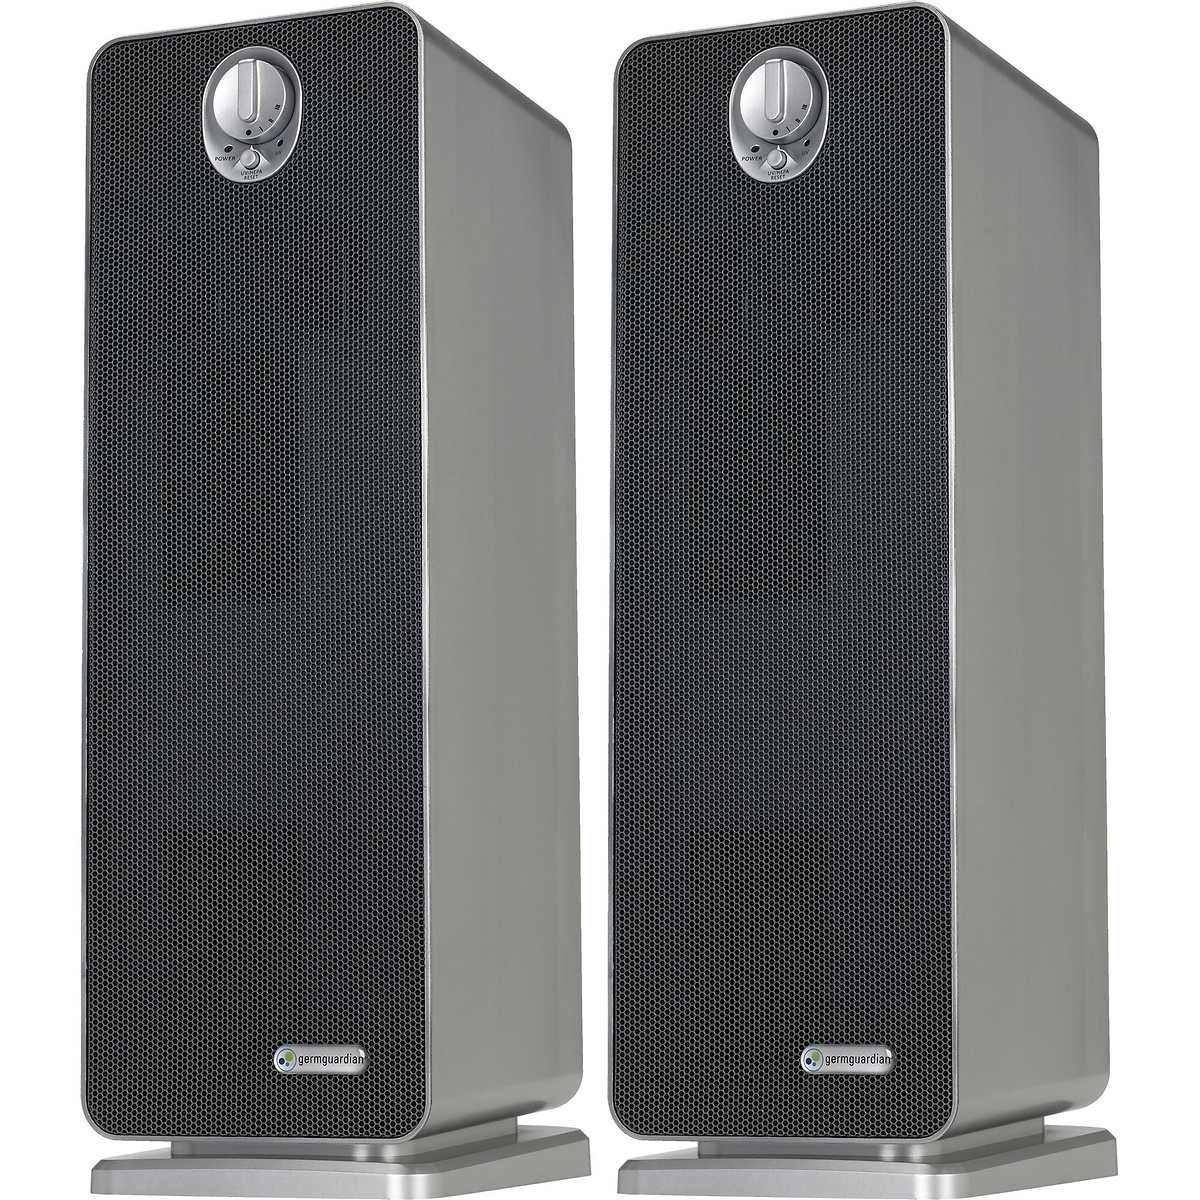 GermGuardian 4-in-1 True HEPA Air Purifier,with UV Sanitizer and Odor Reduction, 2-pack